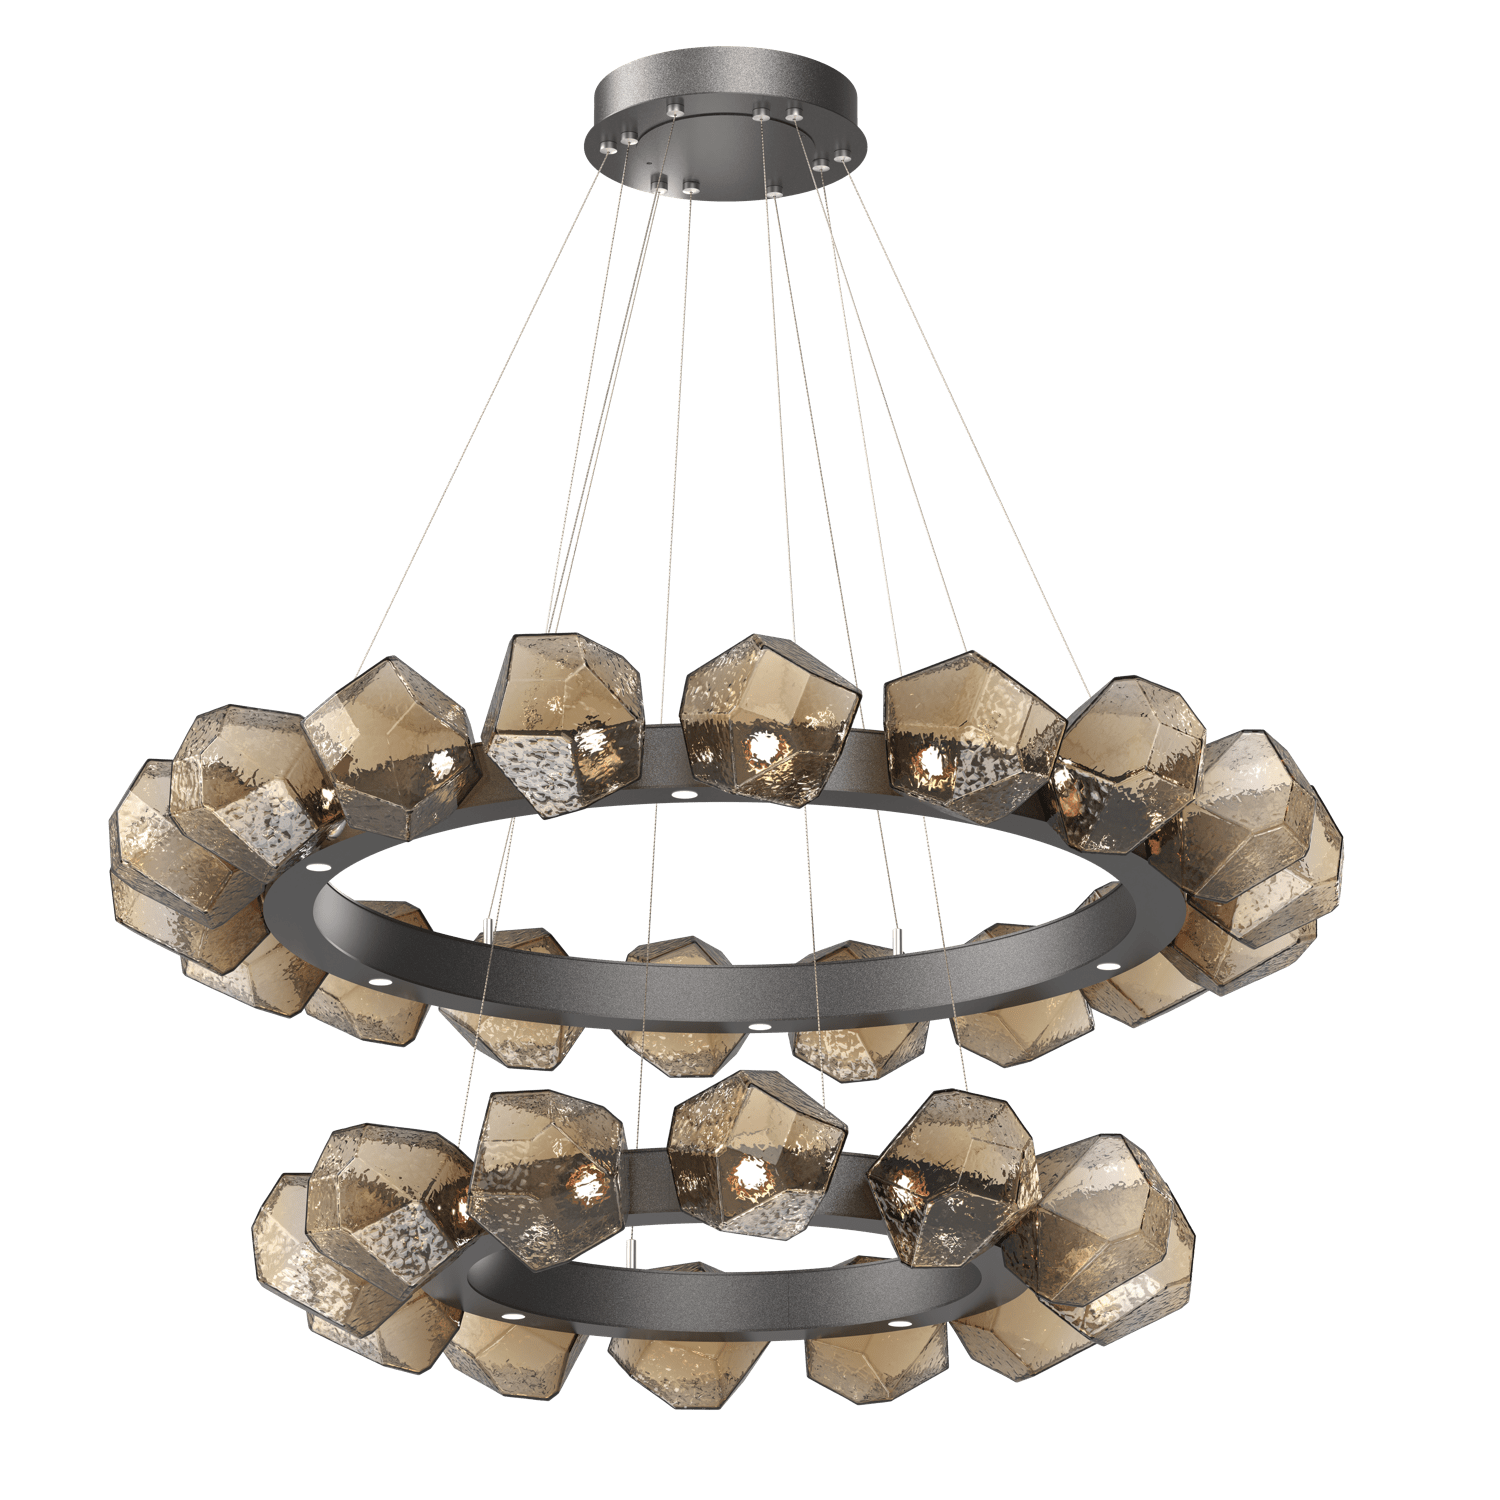 CHB0039-2T-GP-B-Hammerton-Studio-Gem-48-inch-two-tier-radial-ring-chandelier-with-graphite-finish-and-bronze-blown-glass-shades-and-LED-lamping